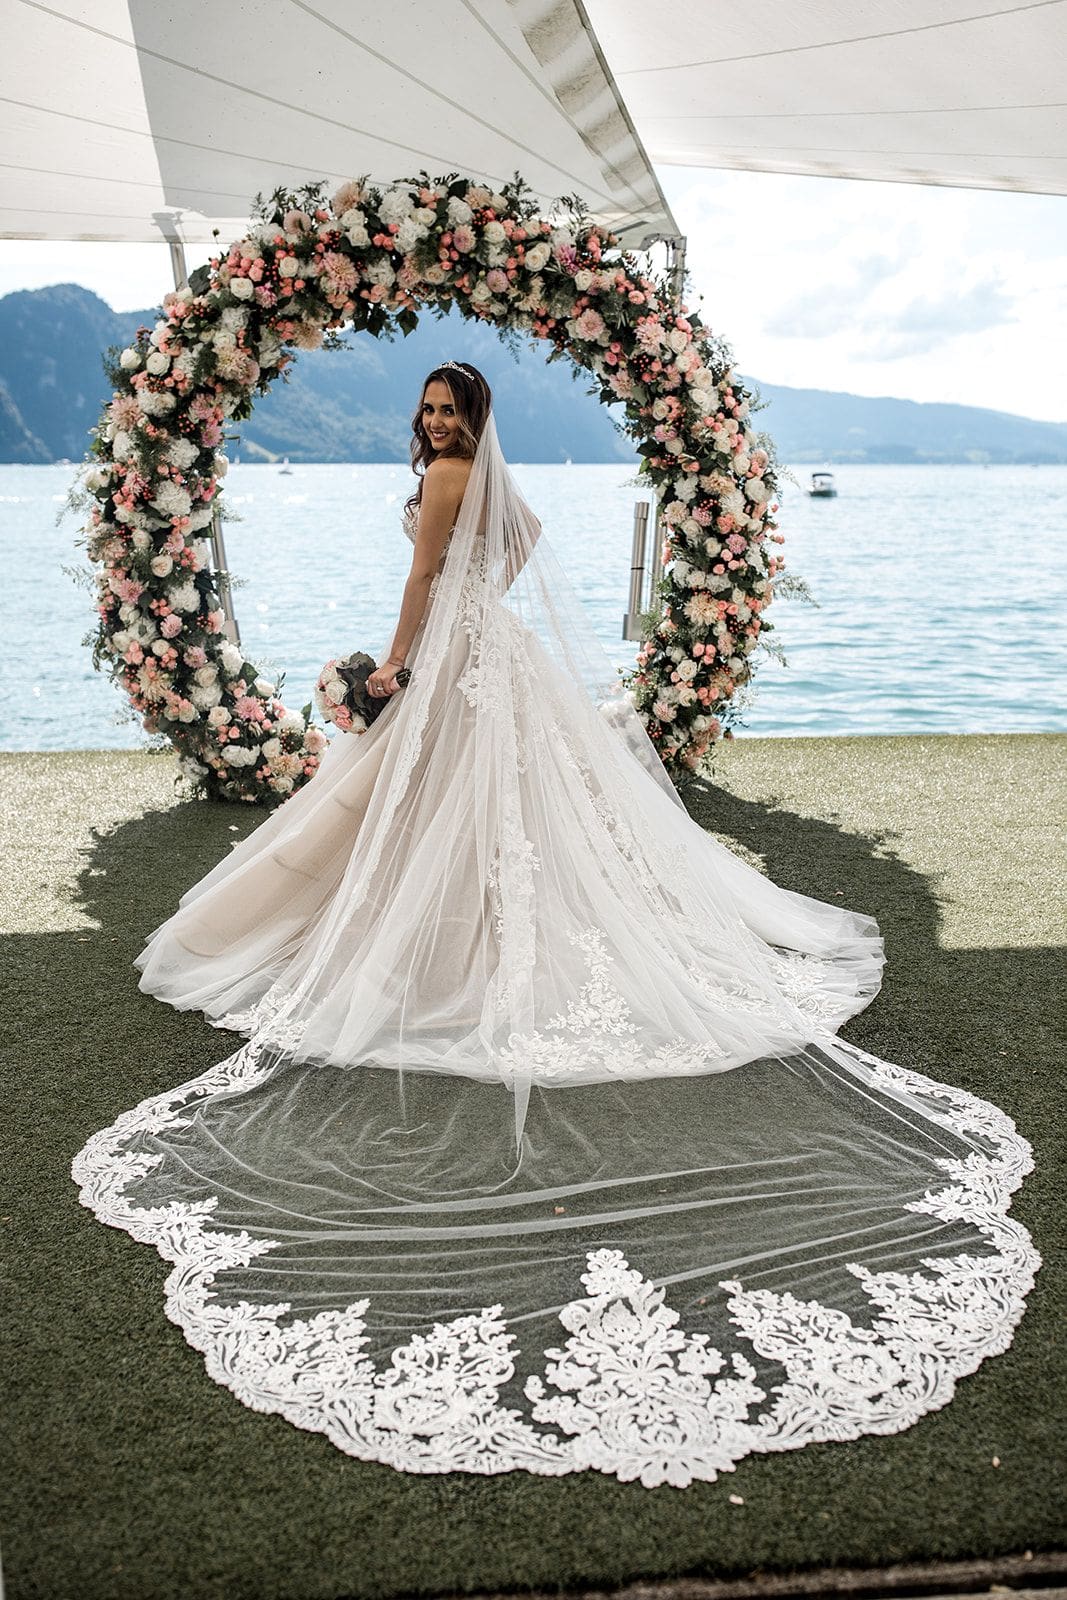 Bride stands at floral ceremony arch overlooking Lake Lucerne, Switzerland